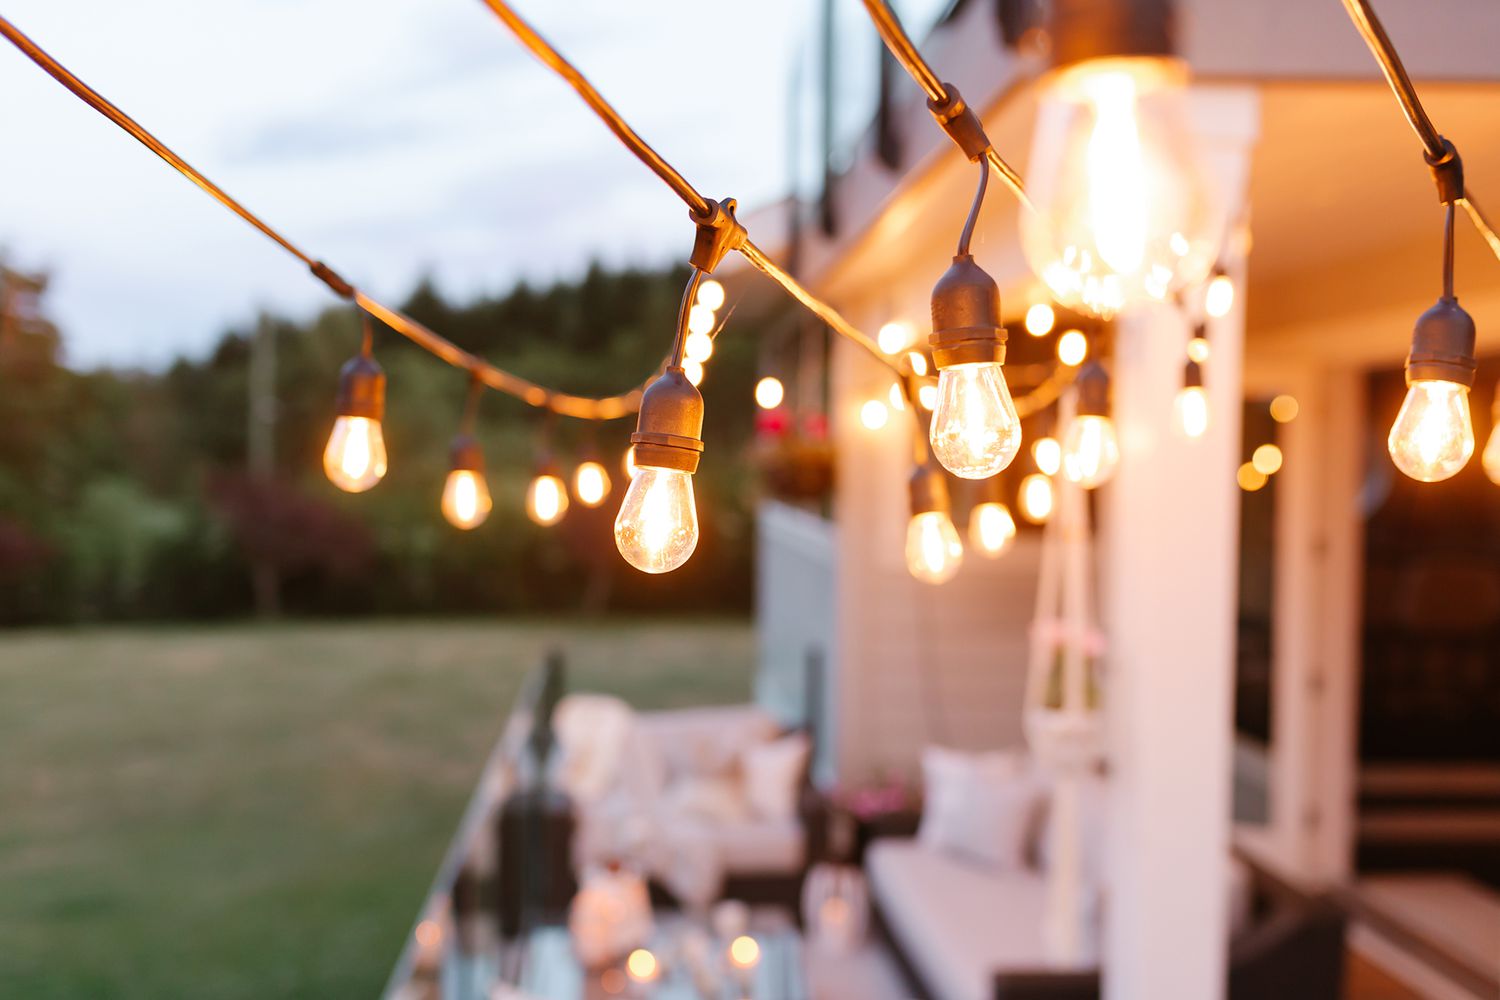 7 Best Solar Lights For Your Outdoor, What Is The Best Outdoor Solar String Lights